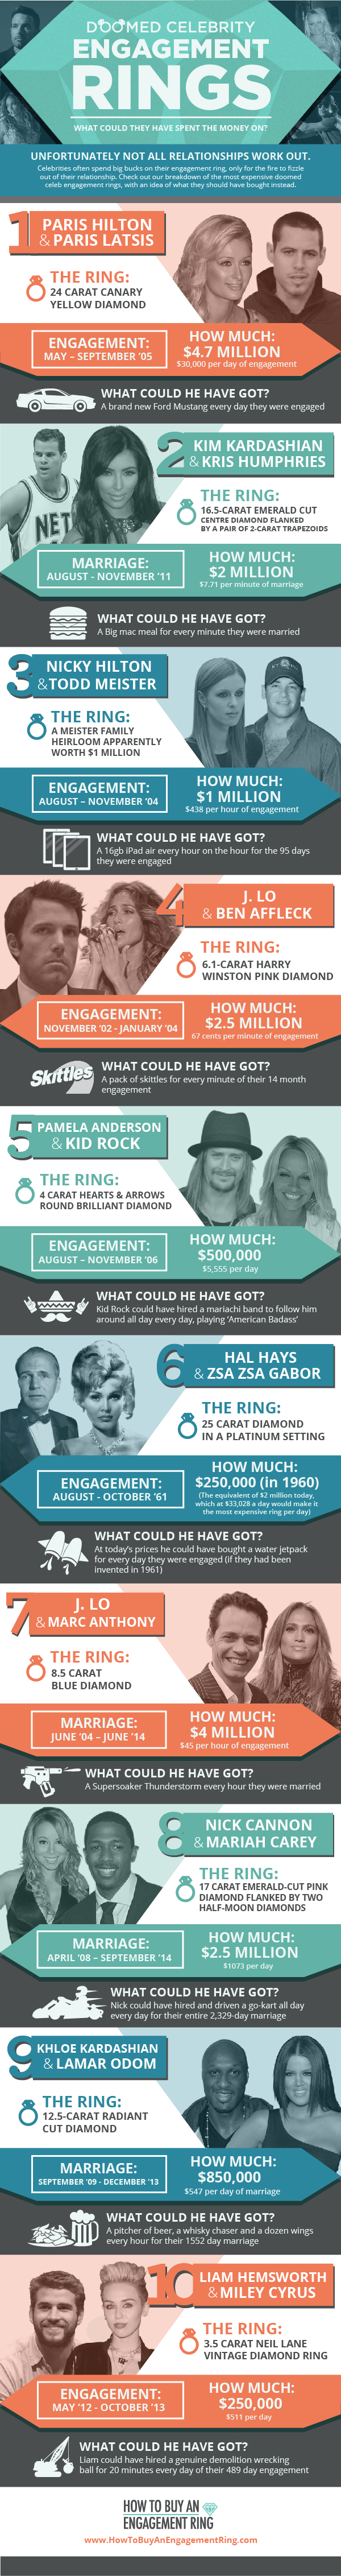 Sadly, sometimes celebrity engagements don’t work out. And when this happens, there is often an expensive bit of bling left over - millions of dollars worth of engagement ring sitting in a drawer somewhere.

This infographic looks at what the guys could have bought instead, from a new Mustang every day to a live-in Mariachi band.